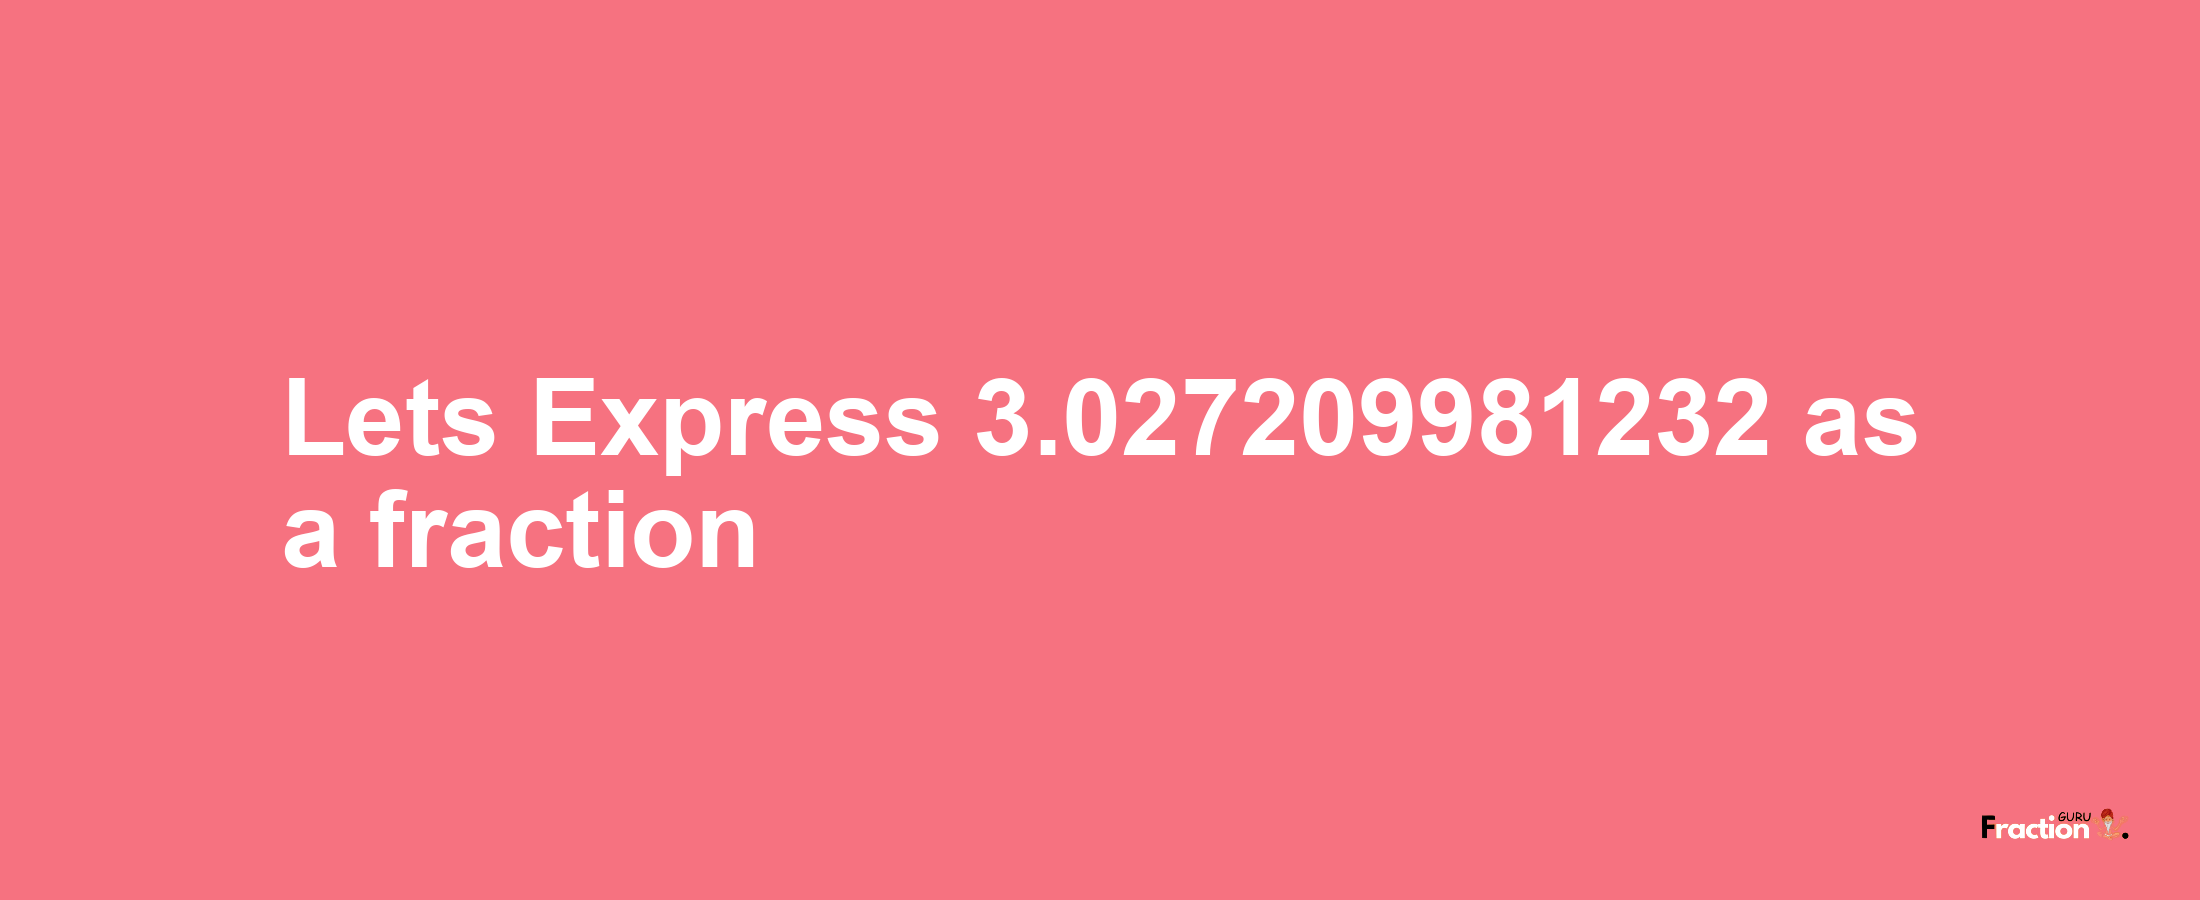 Lets Express 3.027209981232 as afraction